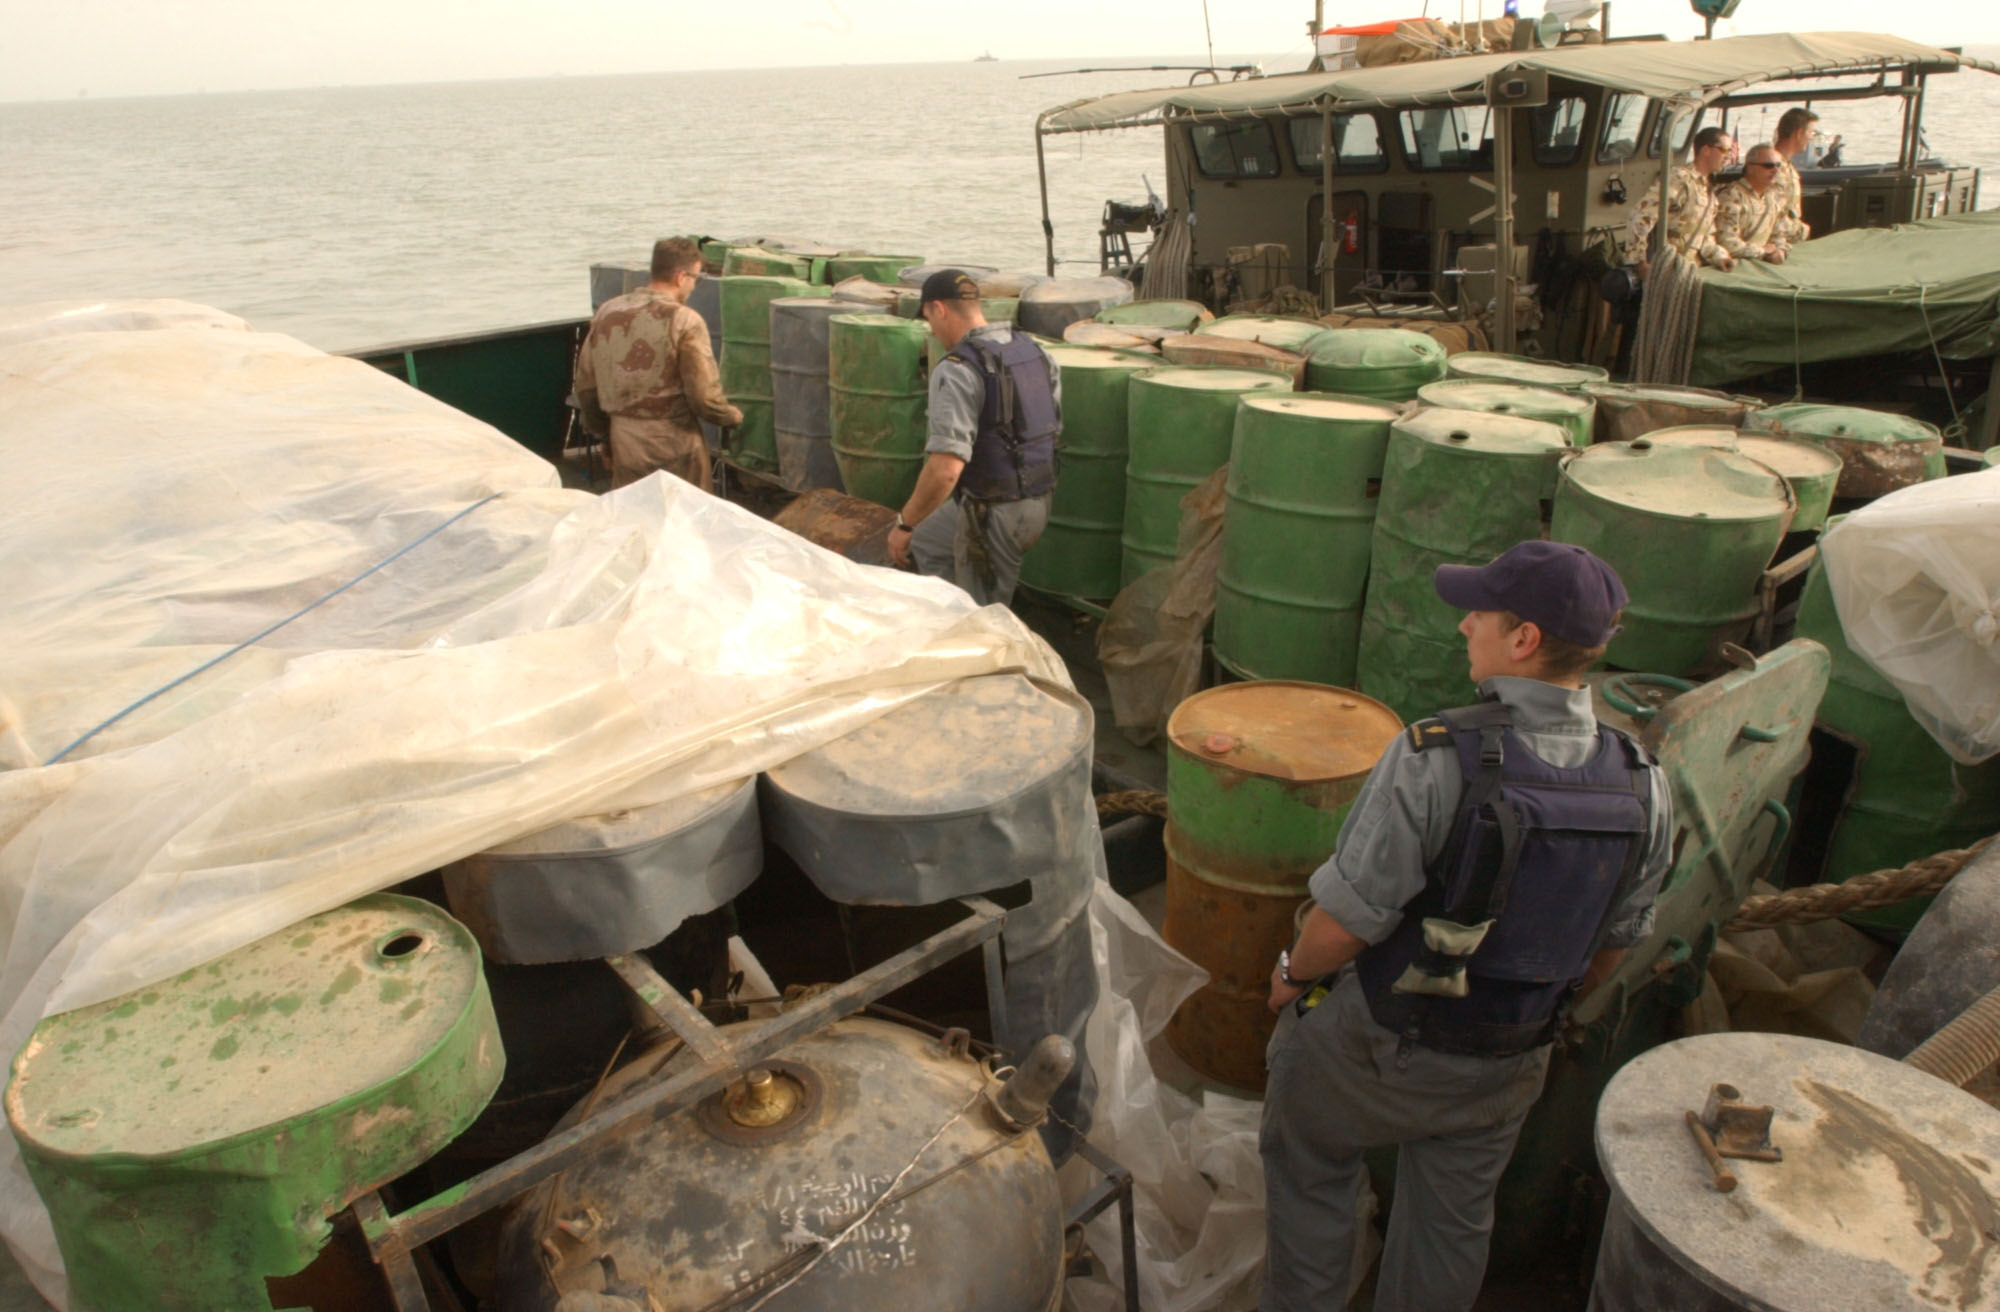 US_Navy_030321-N-4655M-028_Coalition_Navy_Explosive_Ordnance_Disposal_%28EOD%29_team_members_inspect_camouflaged_mines_hidden_inside_oil_barrels_on_the_deck_of_an_Iraqi_shipping_barge.jpg